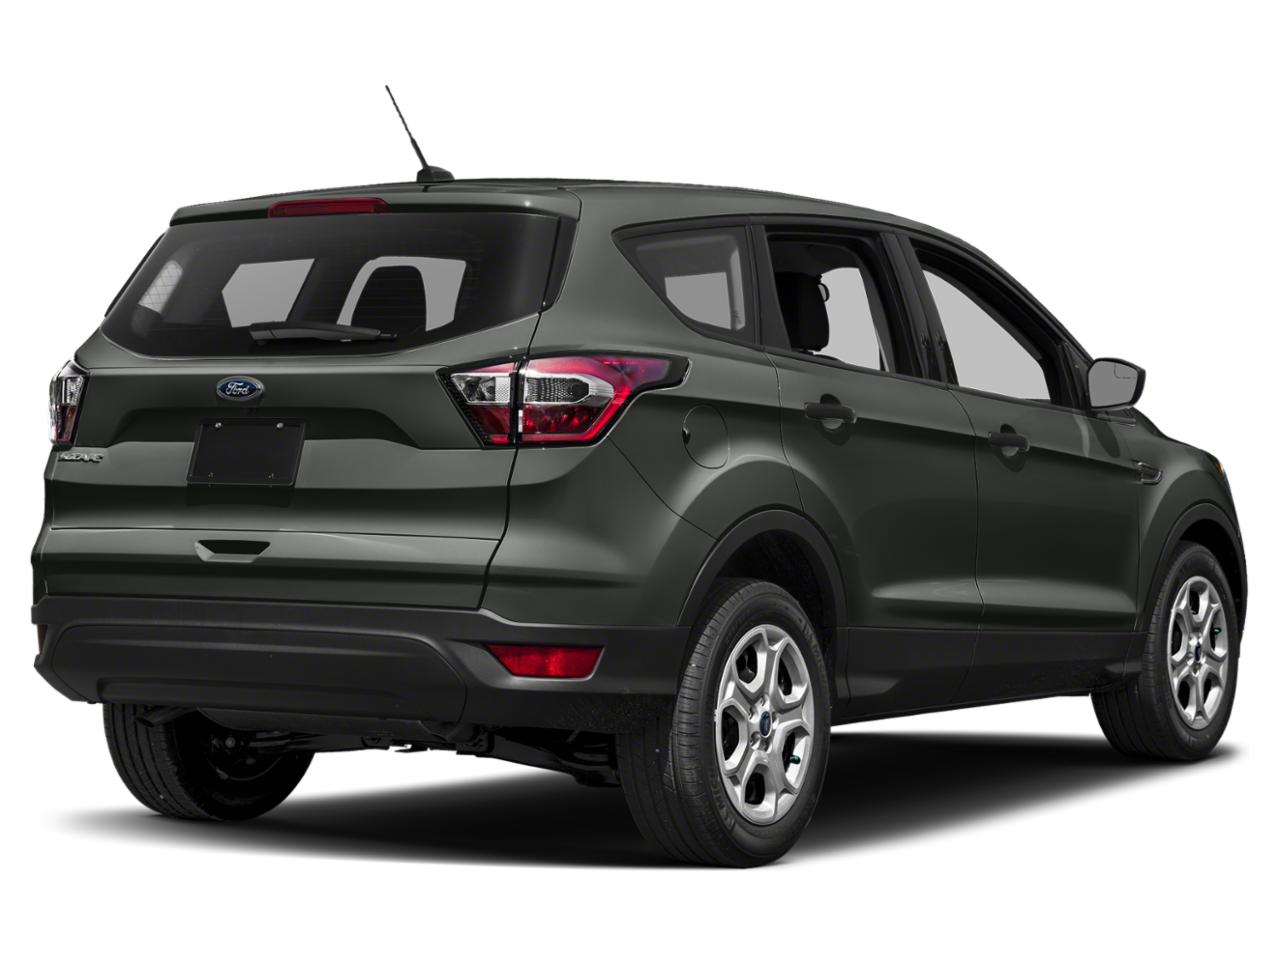 2019 Ford Escape Vehicle Photo in Saint Charles, IL 60174